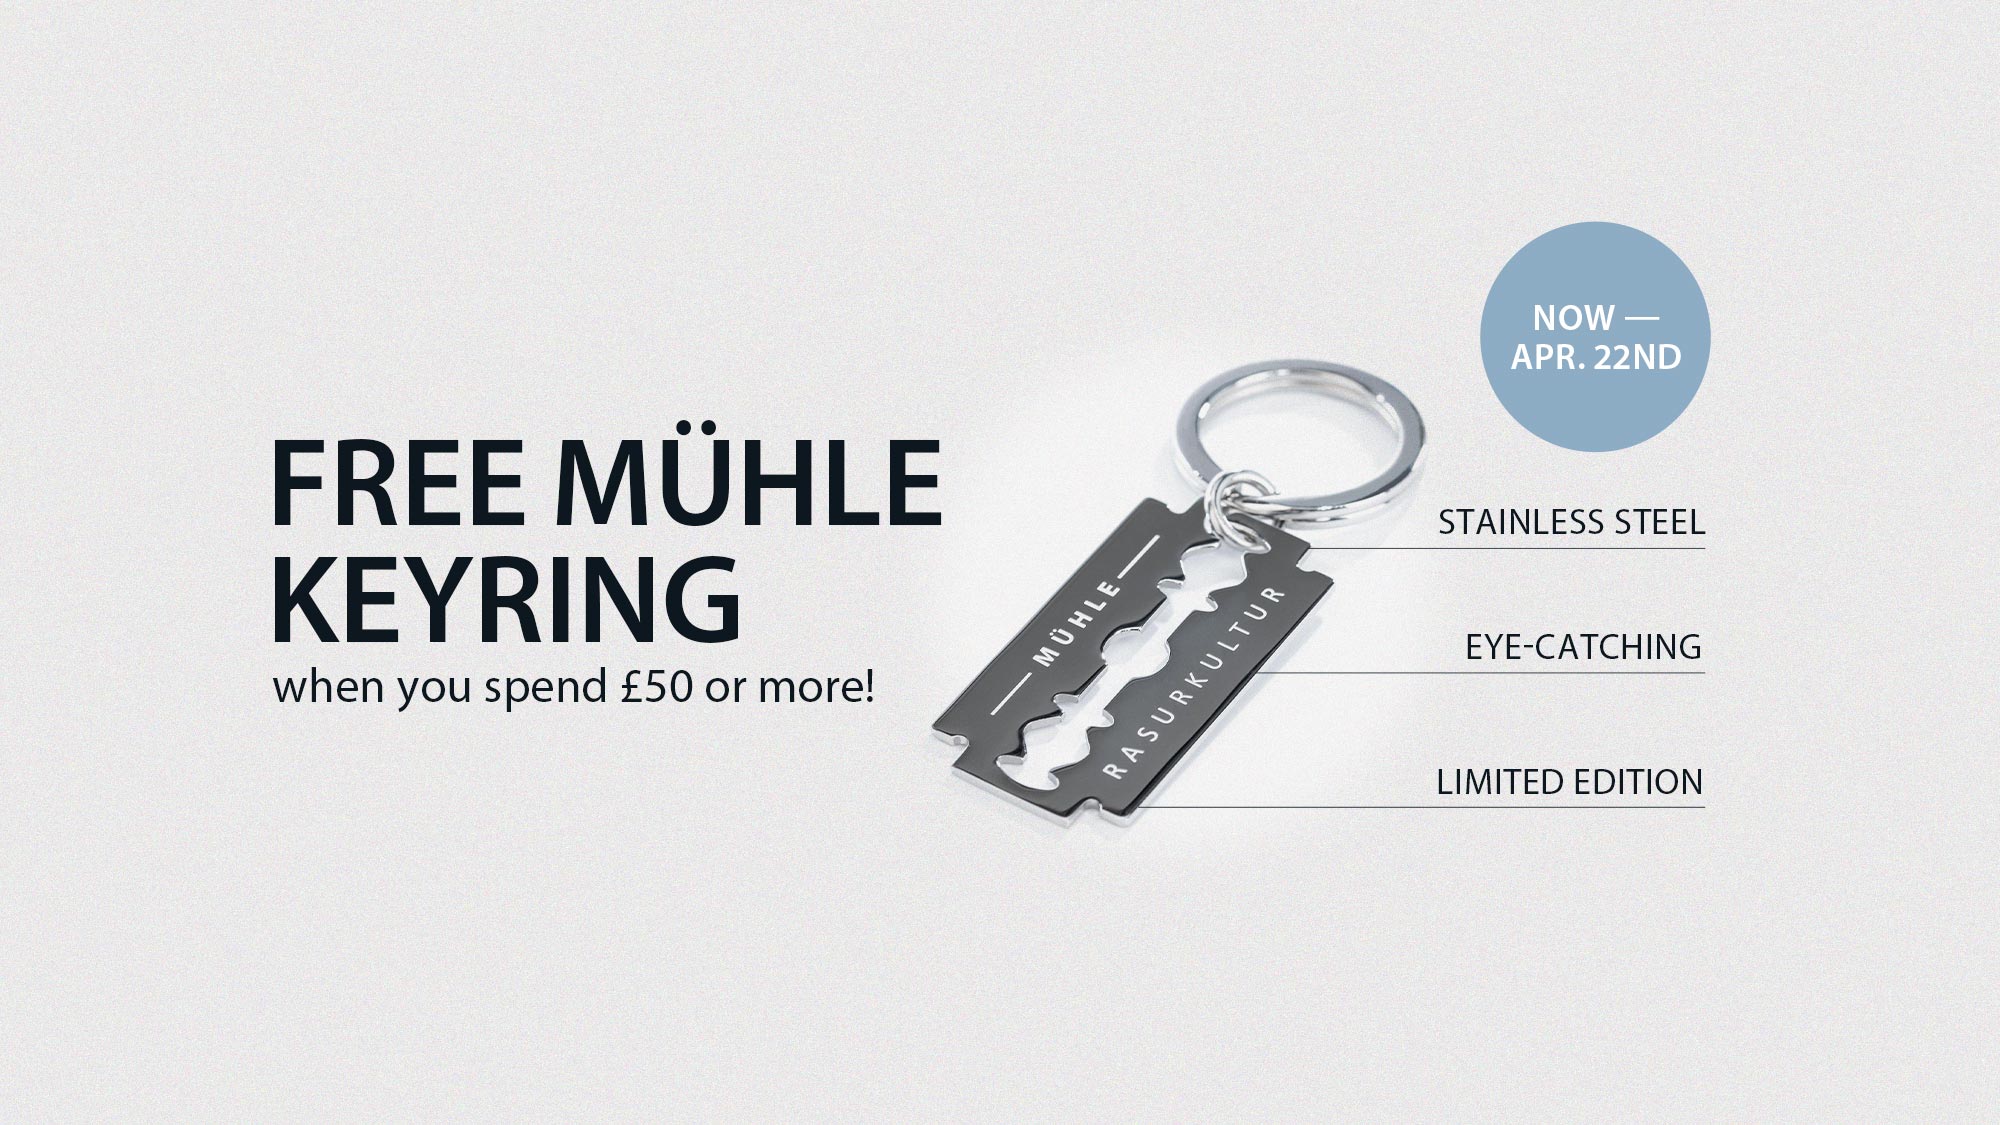 MUHLE Banners Keyring GWP 2